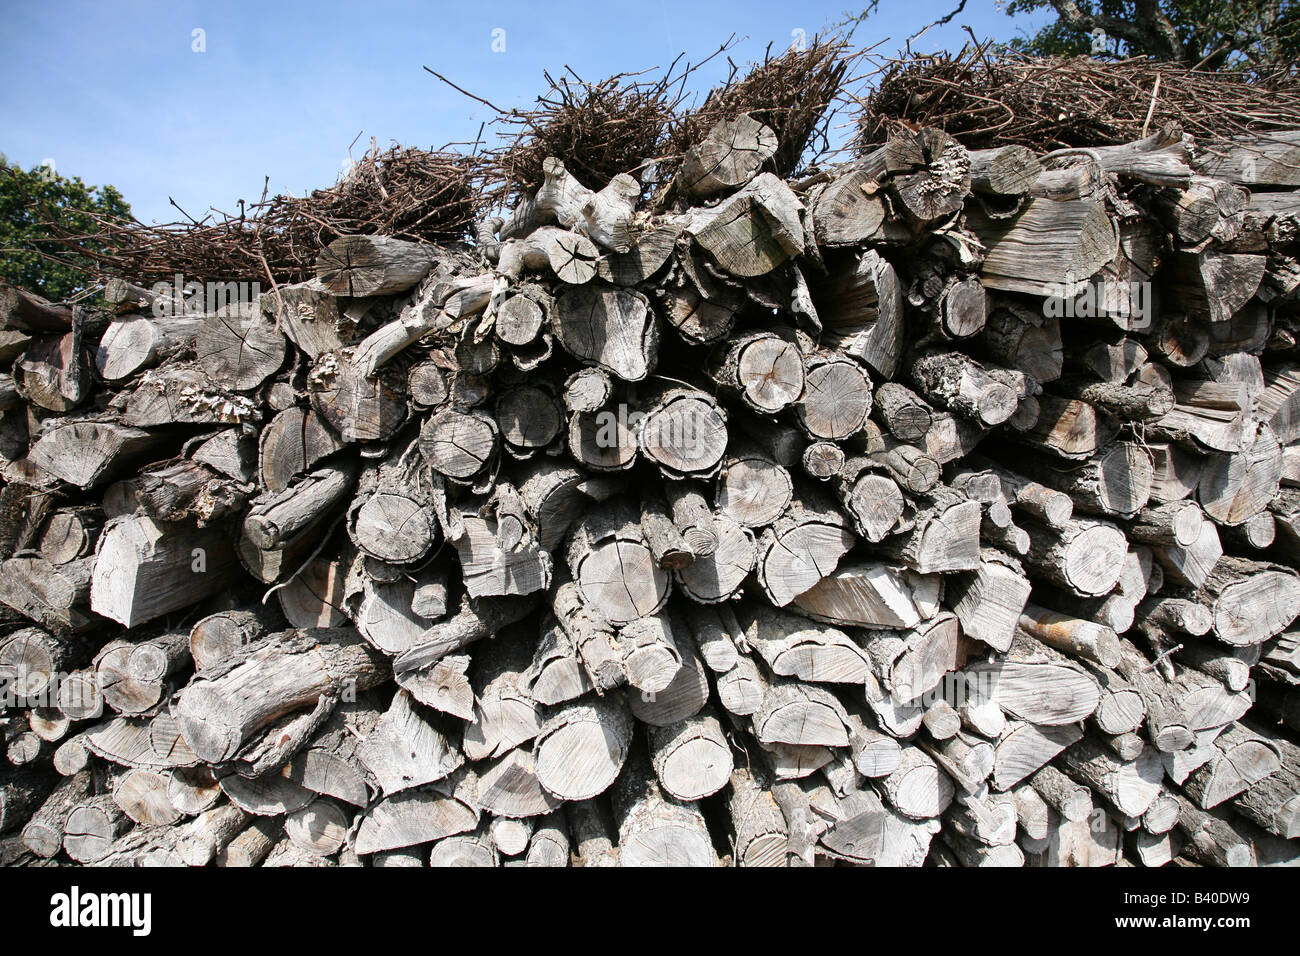 A large pile of logs stacked up ready to use for fire wood Stock Photo